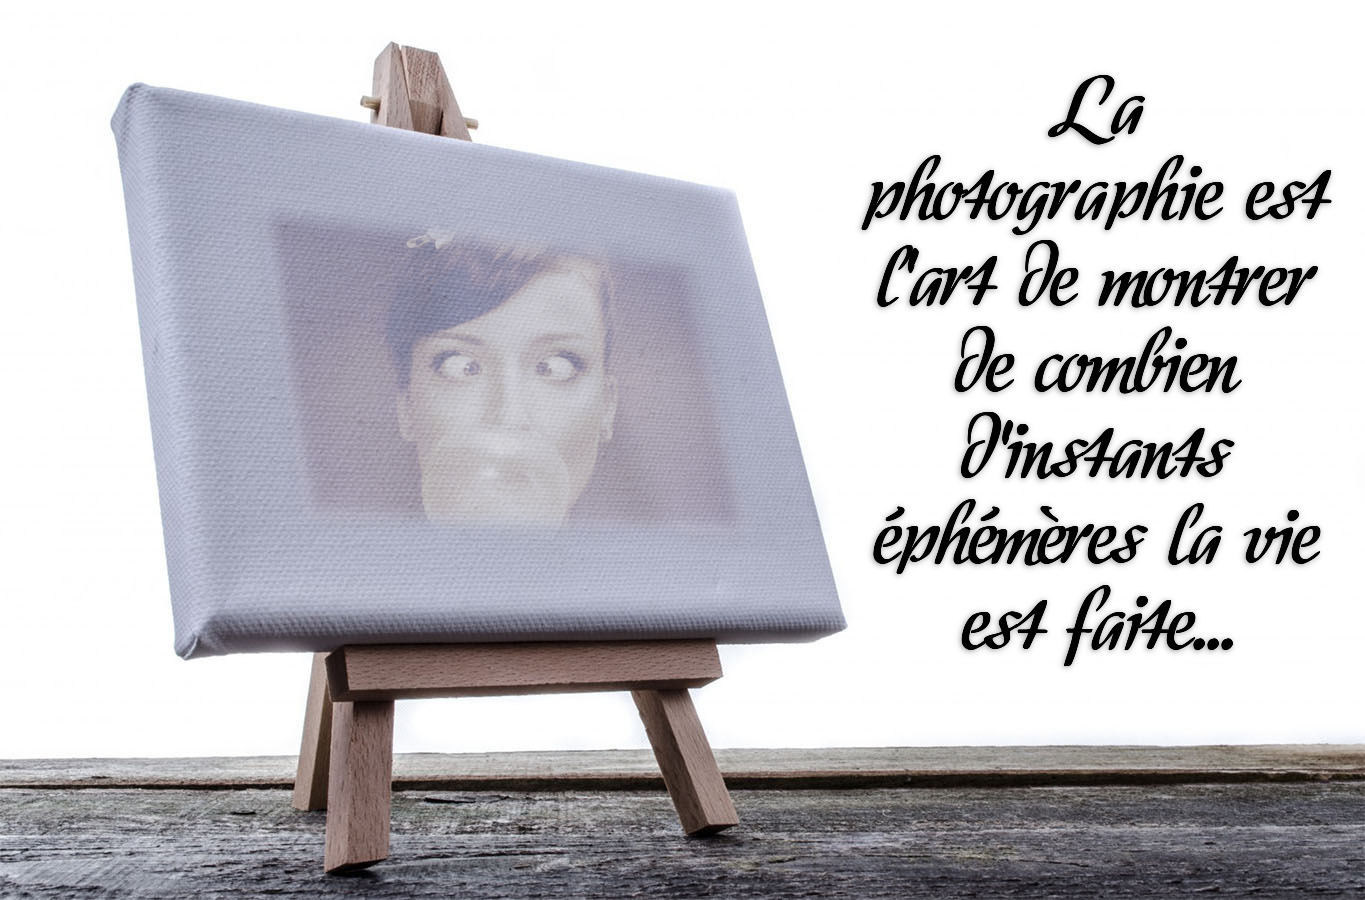 Painting on a canvas Photo frame effect